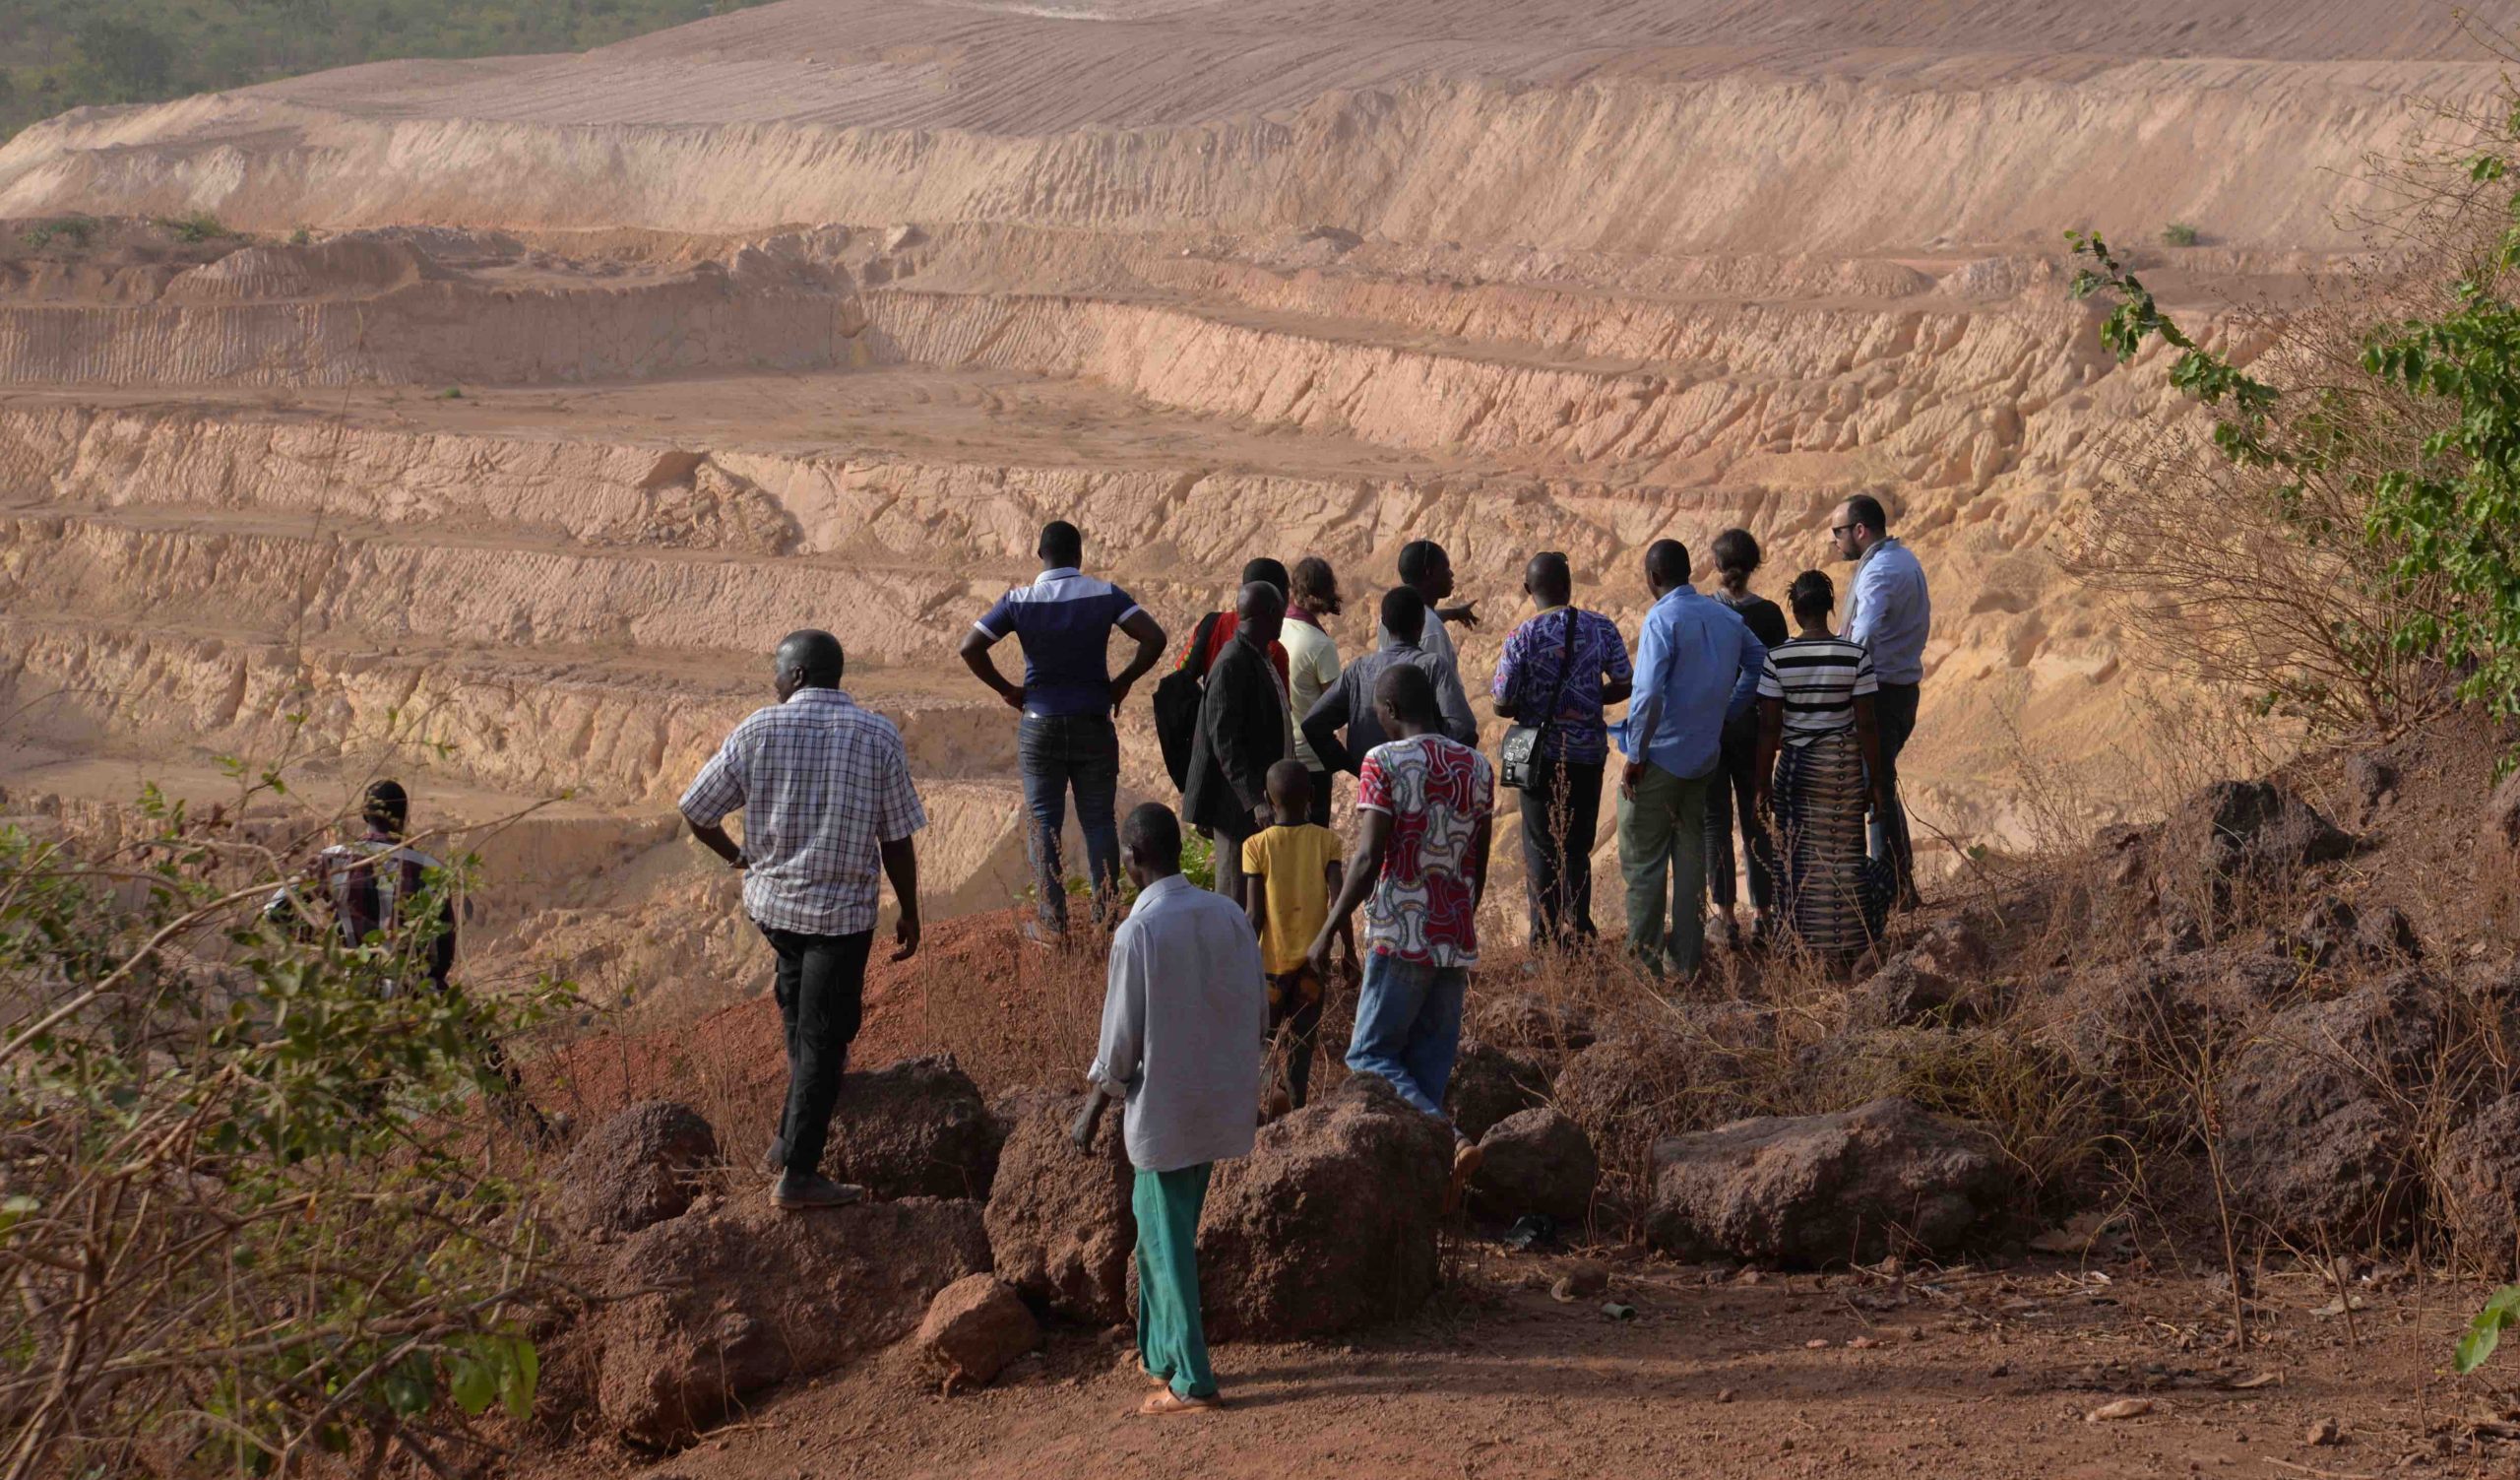 Overlooking the first AngloGold Ashanti mine in the Siguiri region of Guinea. Approximately 380 households were forcibly evicted from their ancestral land to make way for the open-pit oxide goldmine. Click on the photo for more information. (Photo: Inclusive Development International)